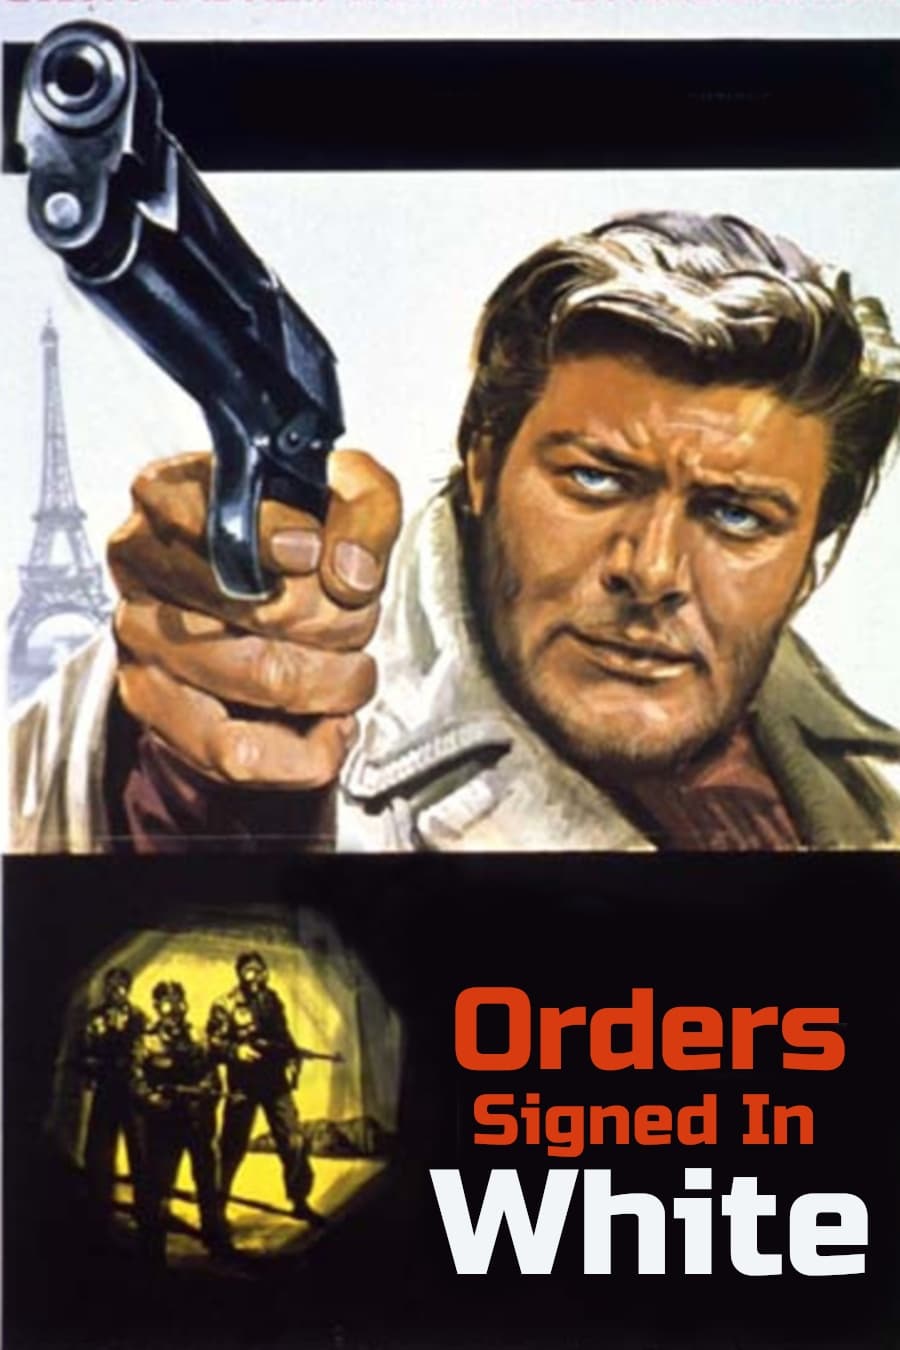 Orders Signed in White (1974)